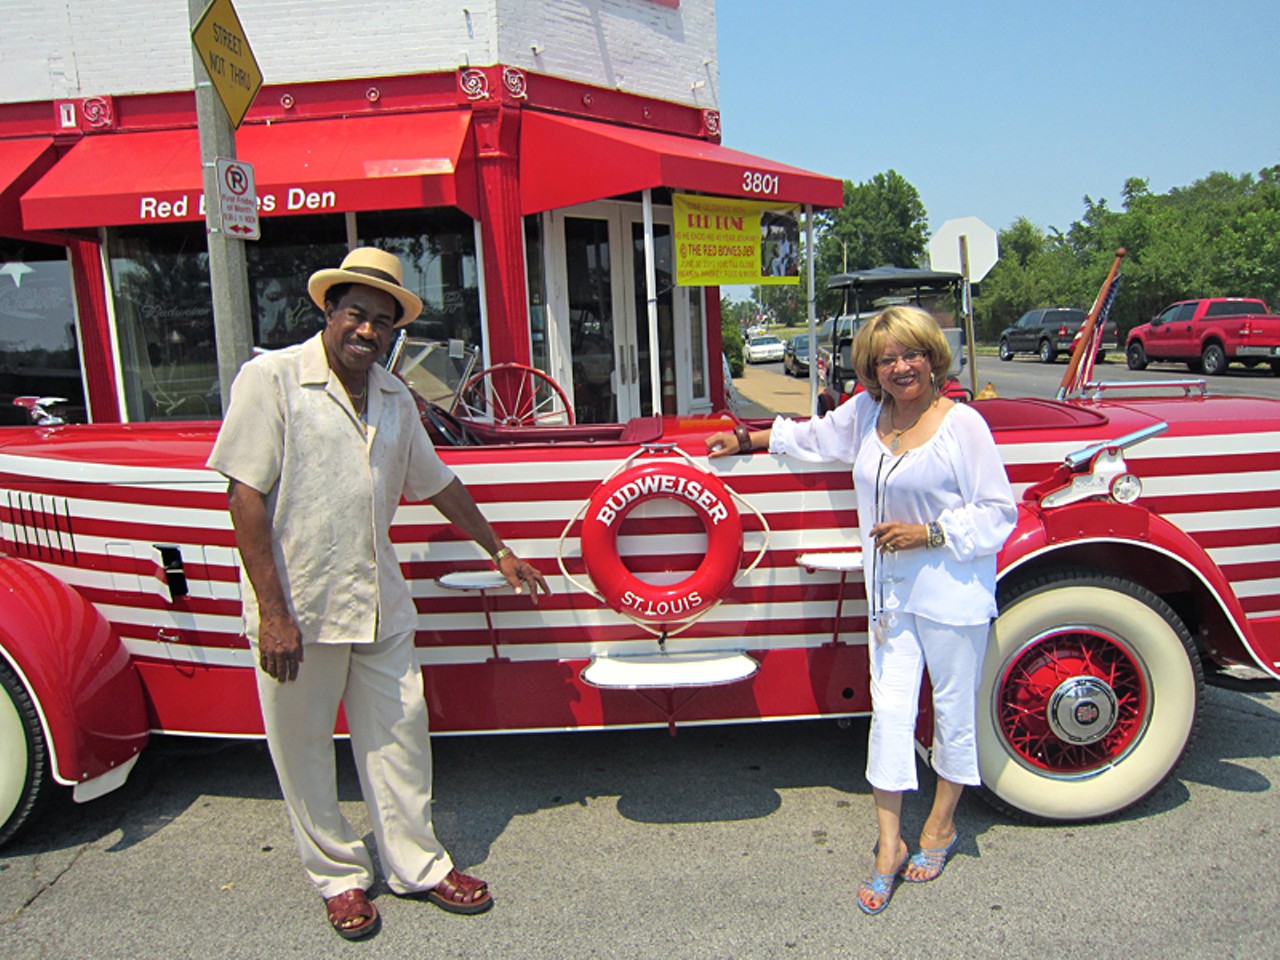 Red Bone and his lady, Diane, in front of the Budweiser Land Cruiser